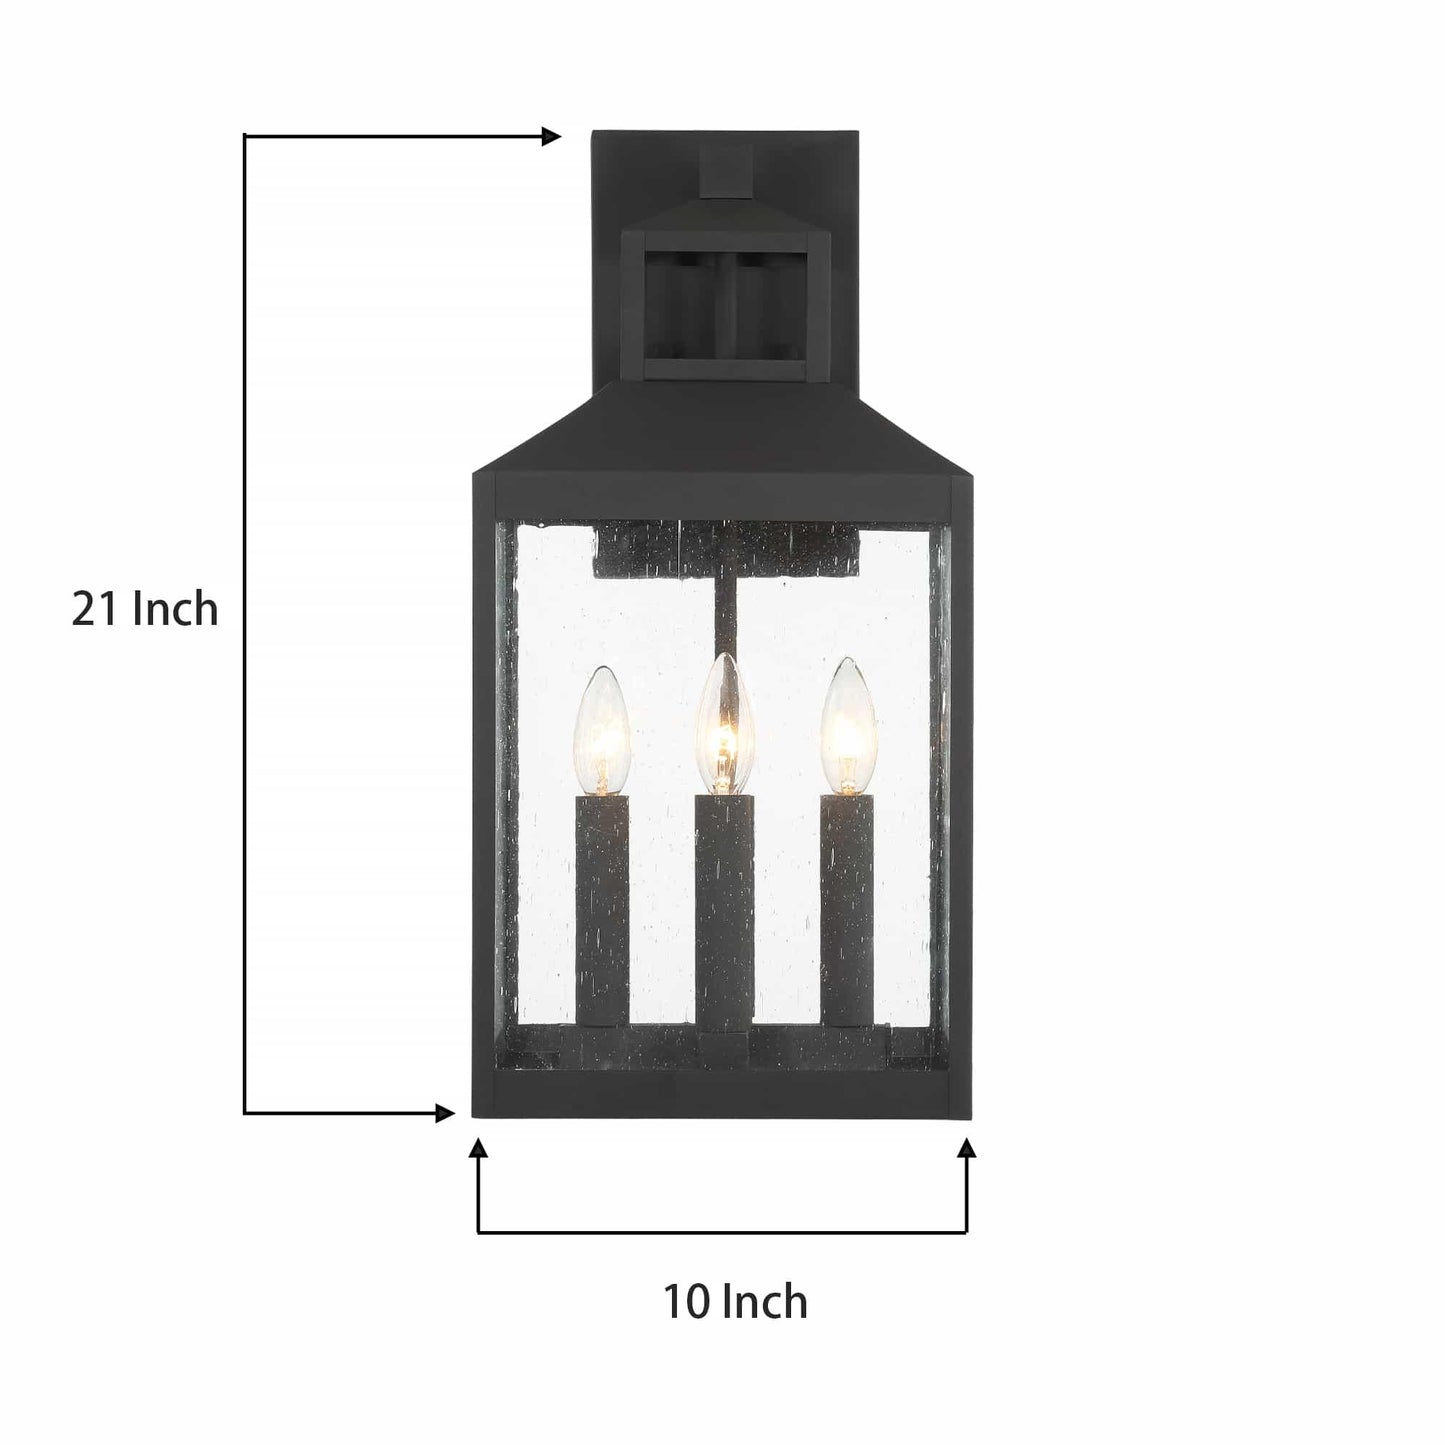 4 light outdoor lantern wall sconce (14) by ACROMA